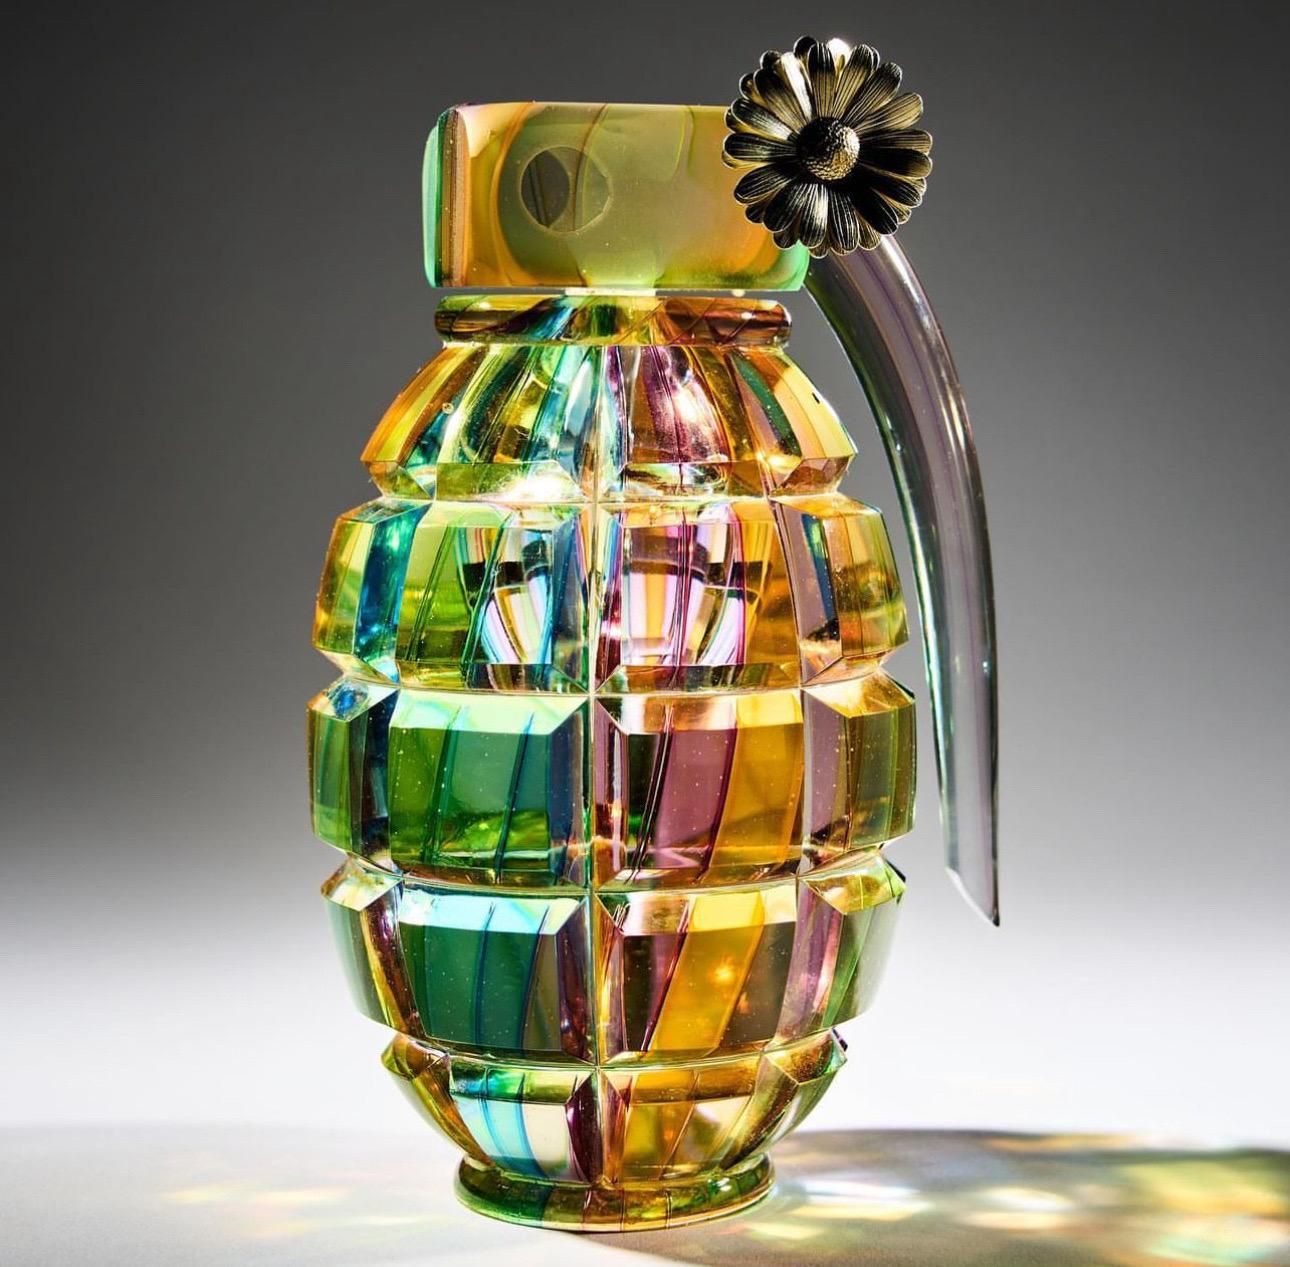 Layne Rowe, Rainbow Grenade, 2023

Hot sculpted glass, cut polished and assembled with solid gold daisy

H14 x W7.5 x D6.5cm

A seductive and vulnerable material, glass translates a potentially harmful object into a beautifully fragile art form.